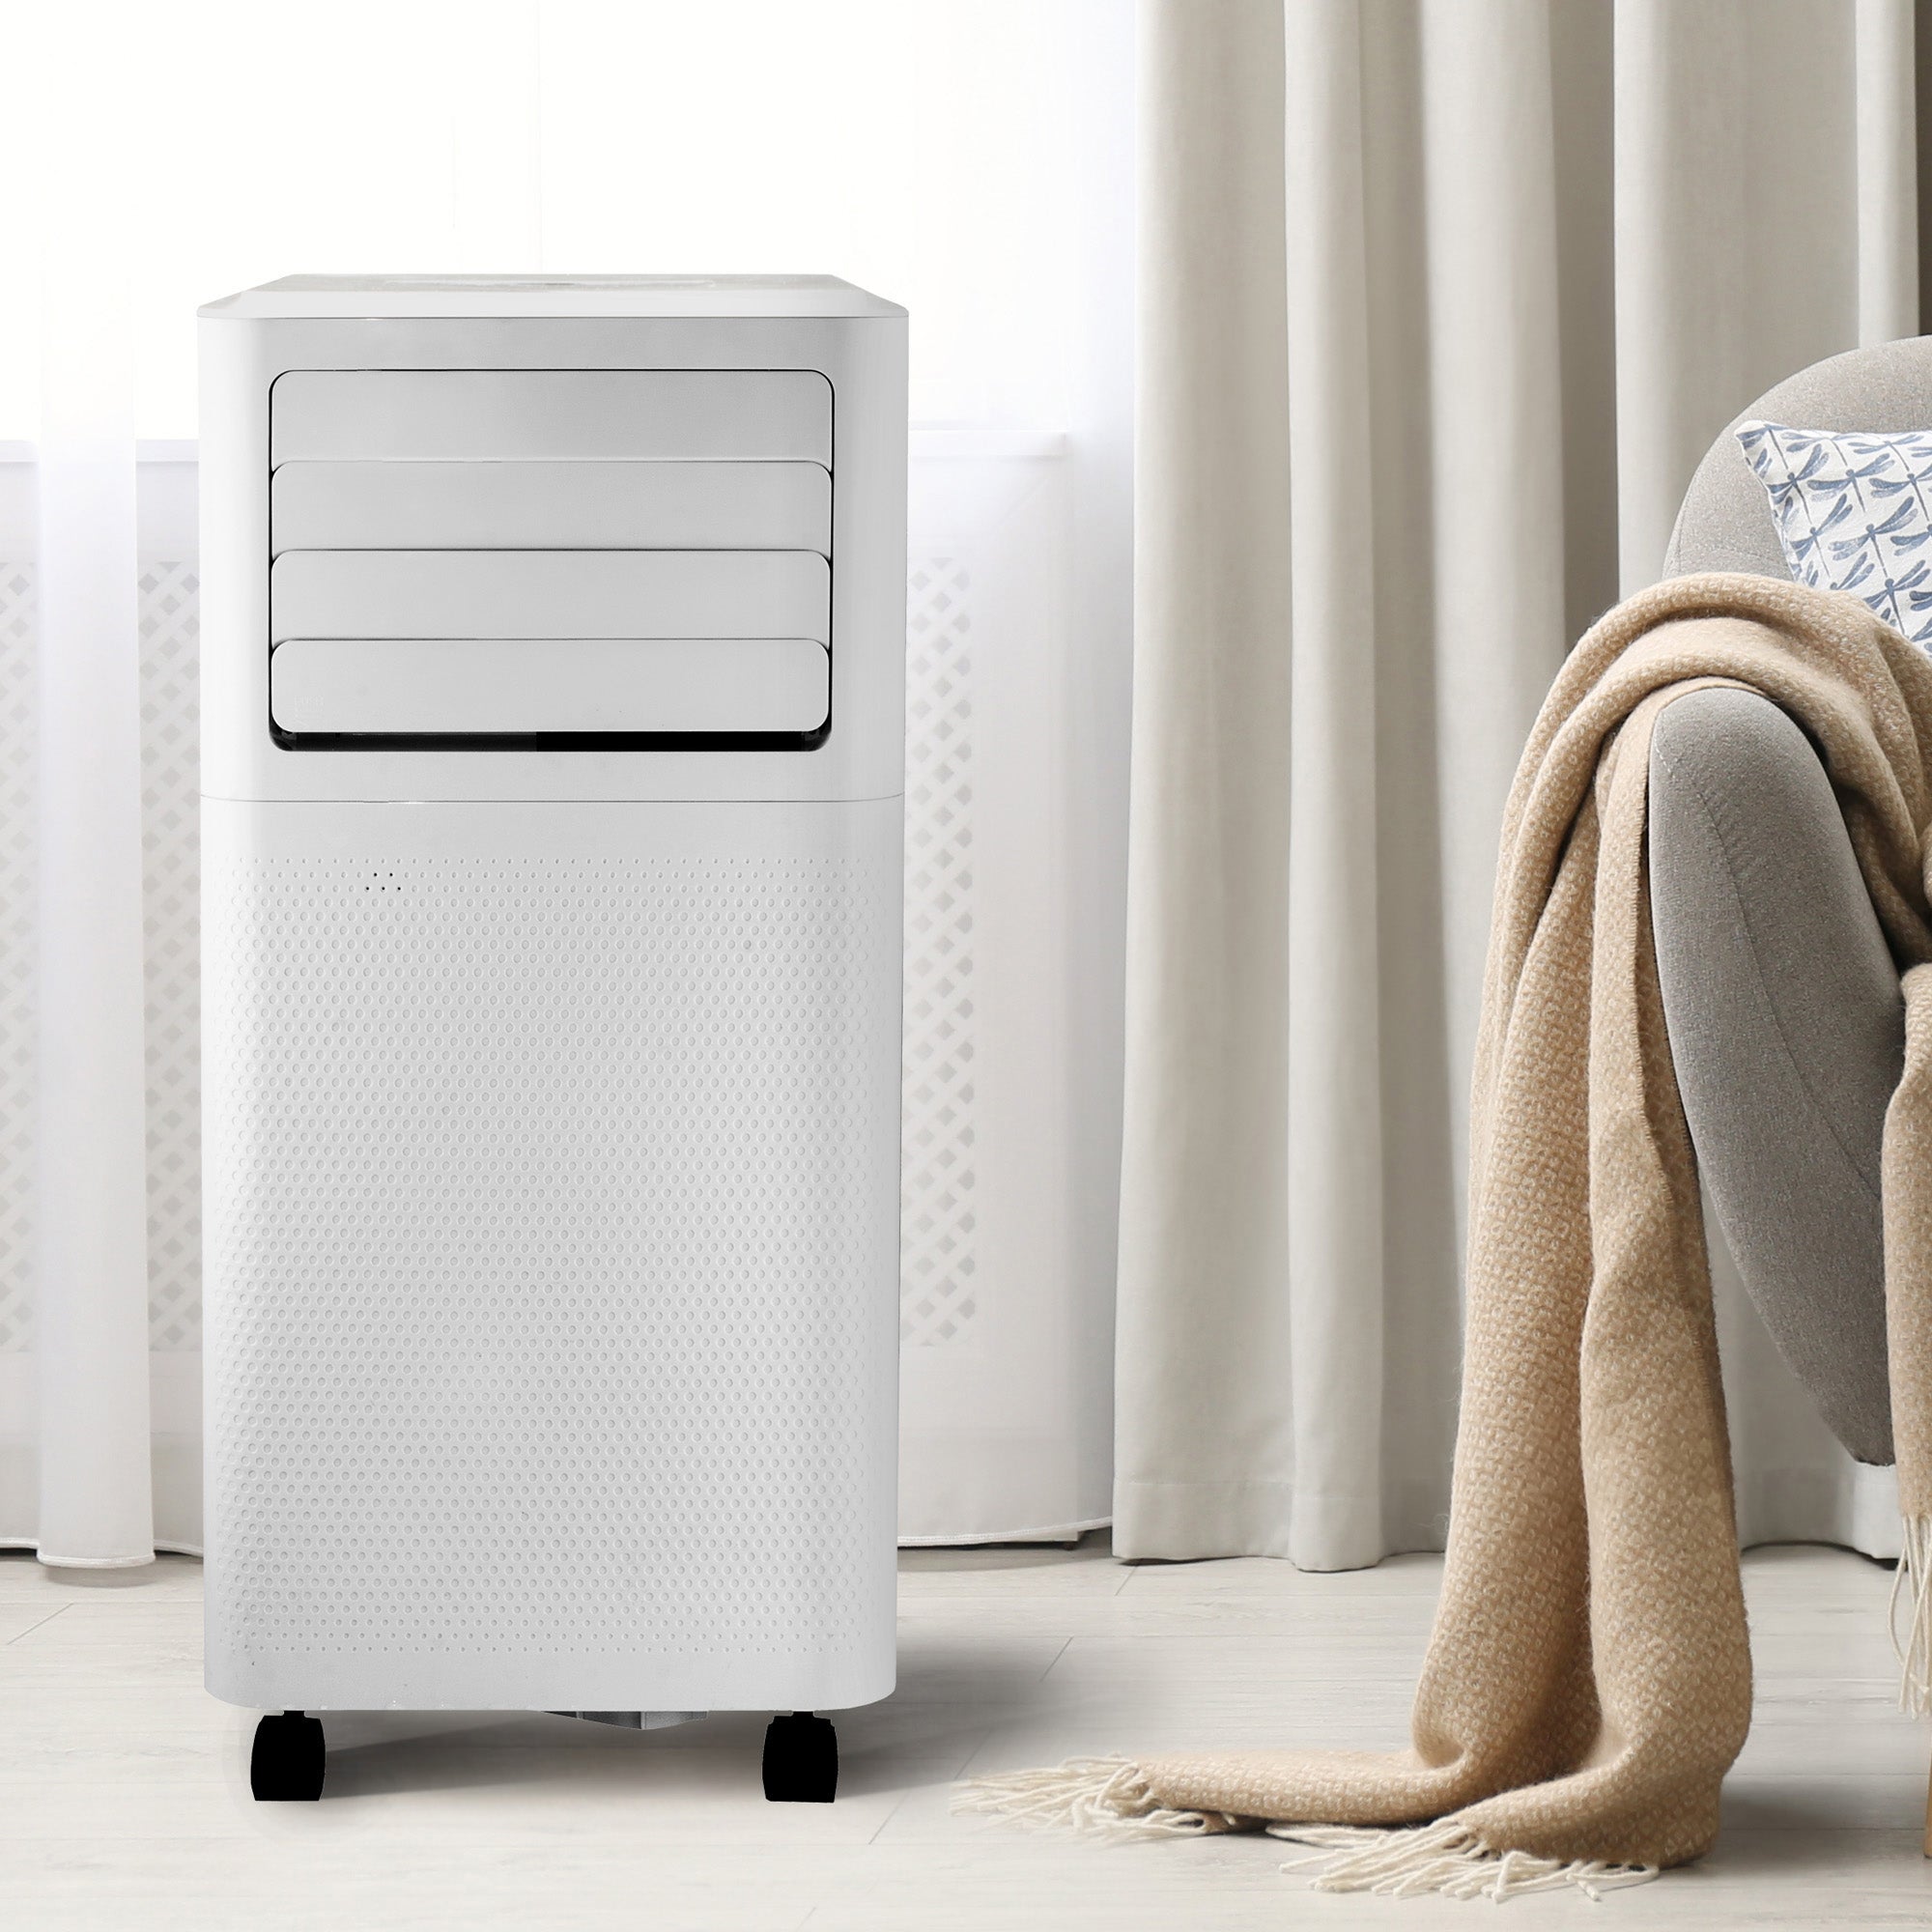 3-in-1 Smart Air Conditioner, Cooling, Fan & Dehumidifier, 9000 BTU